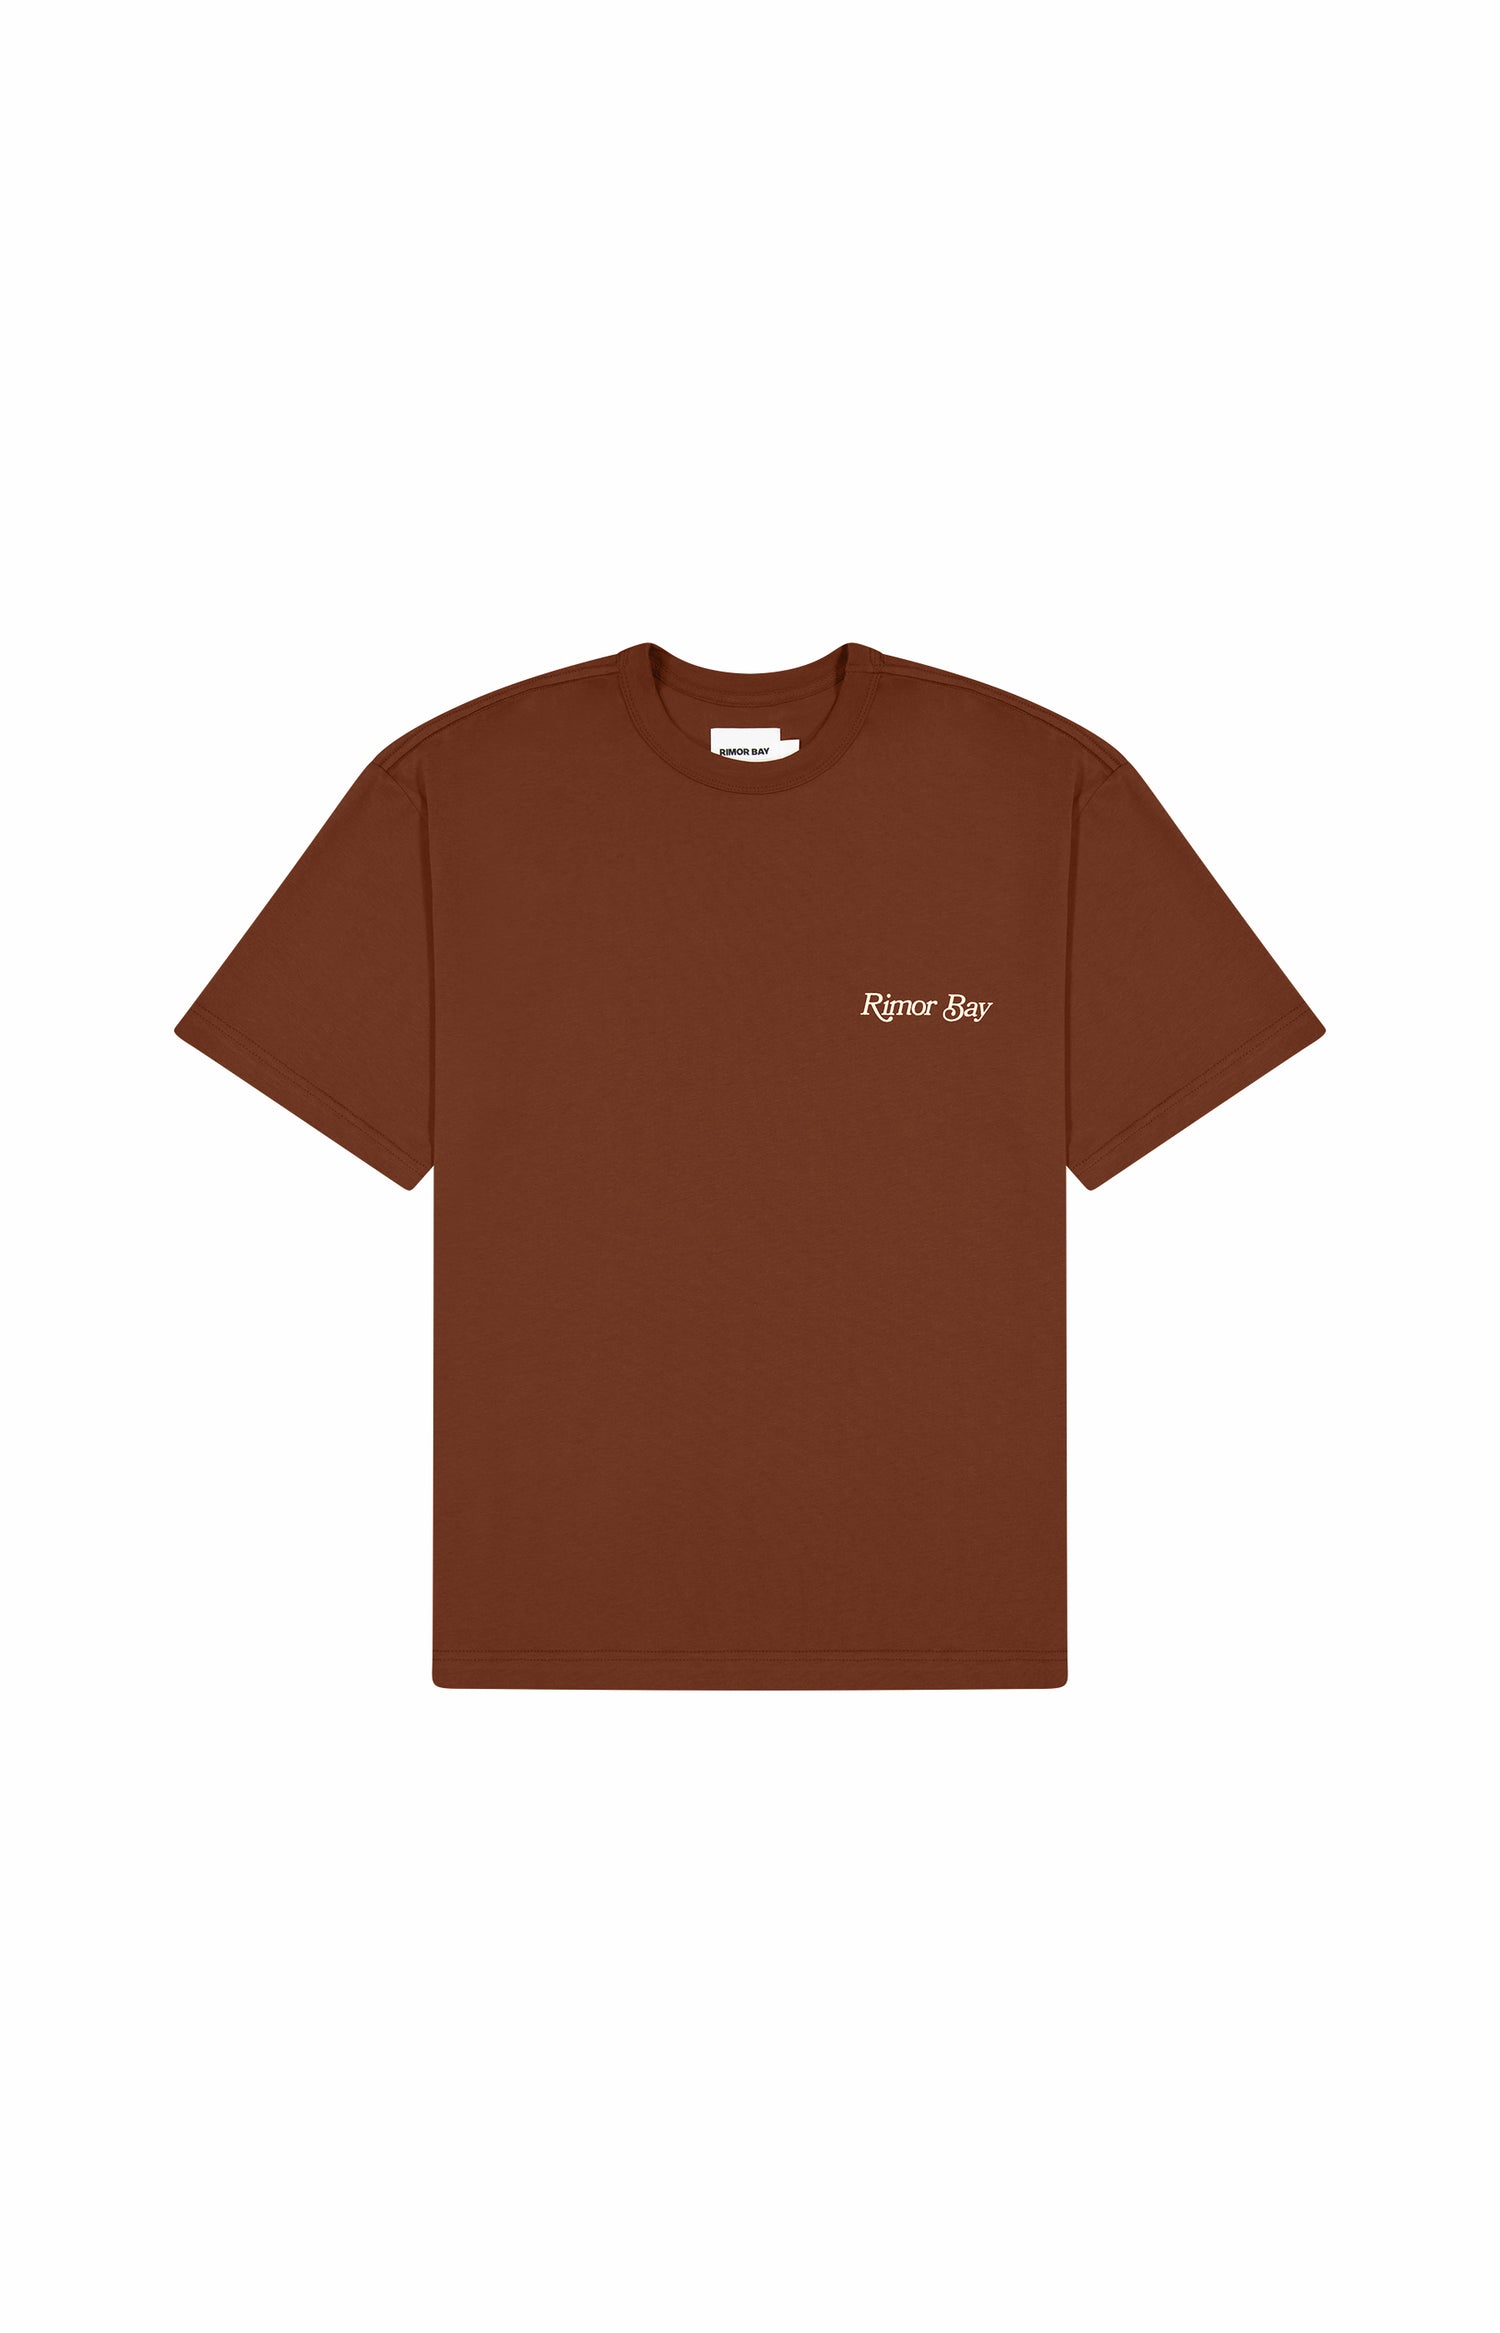 brown shortsleeve tshirt with logo on chest